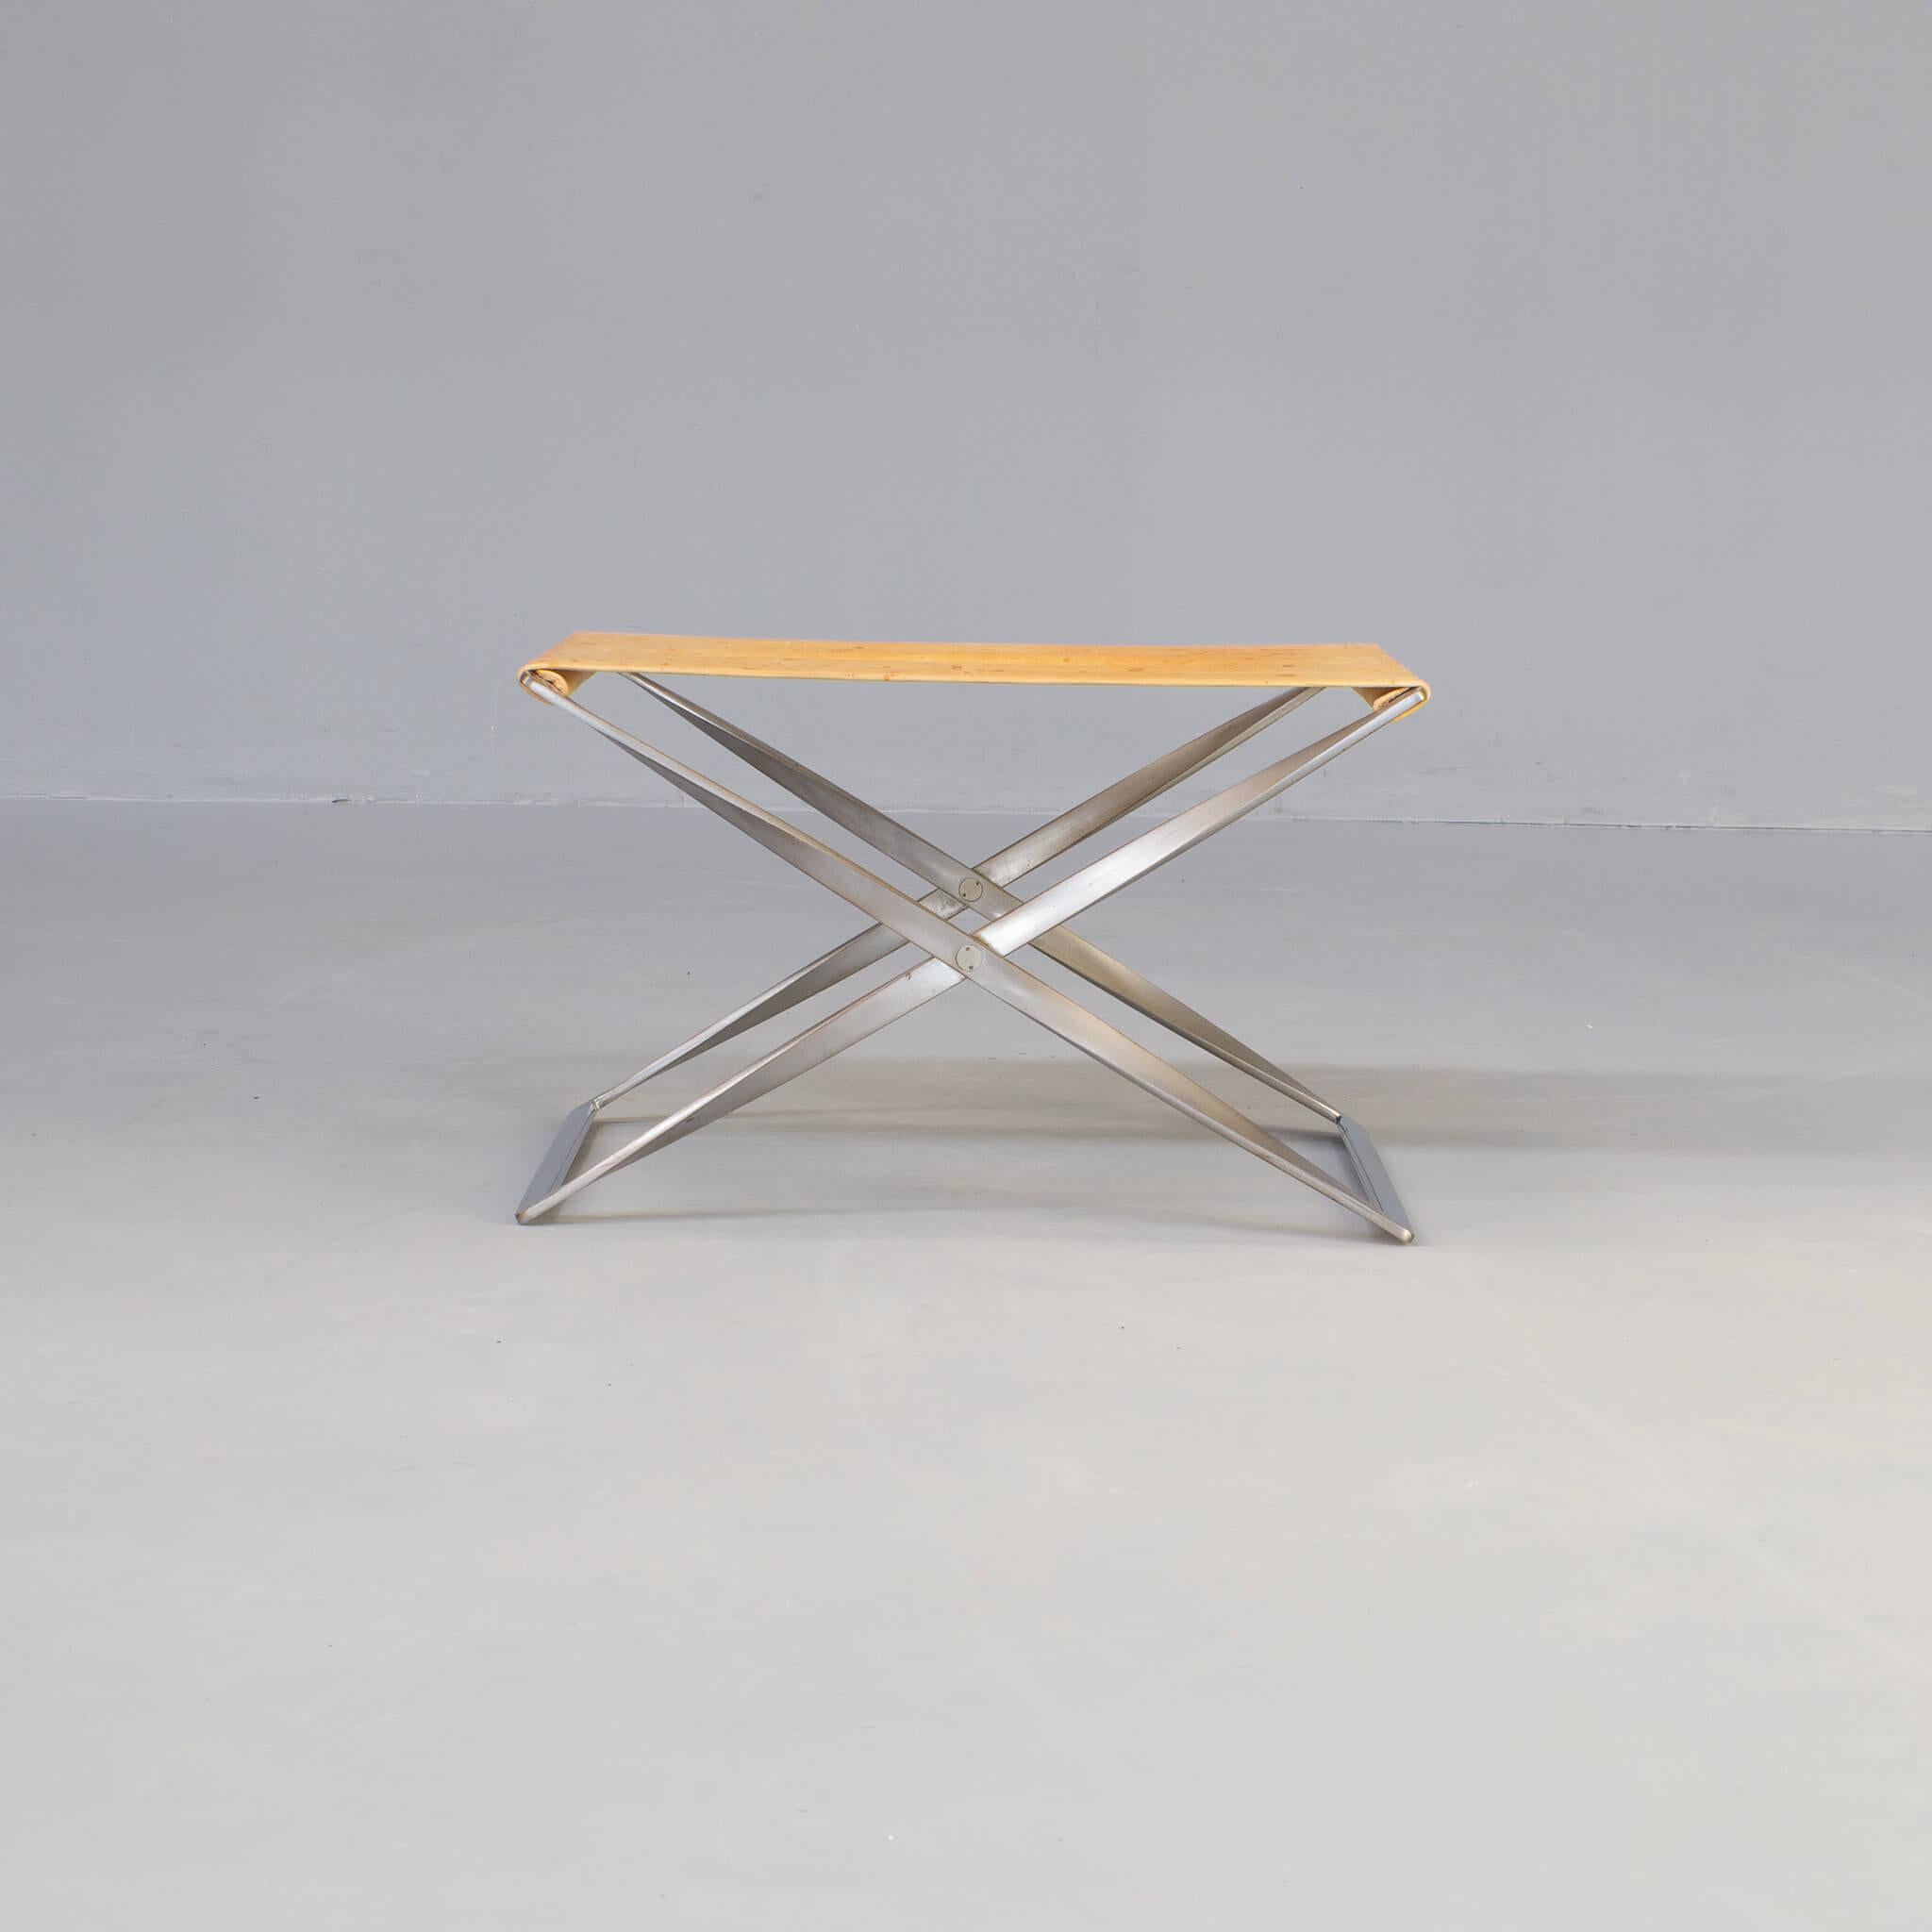 oul Kjaerholm PK91 folding stool for Fritz Hansen.
The PK91 folding stool designed by Poul Kjærholm is based on historical research of Kjaerholm and makes the object completely timeless. The source of inspiration for the folding stool is an ancient